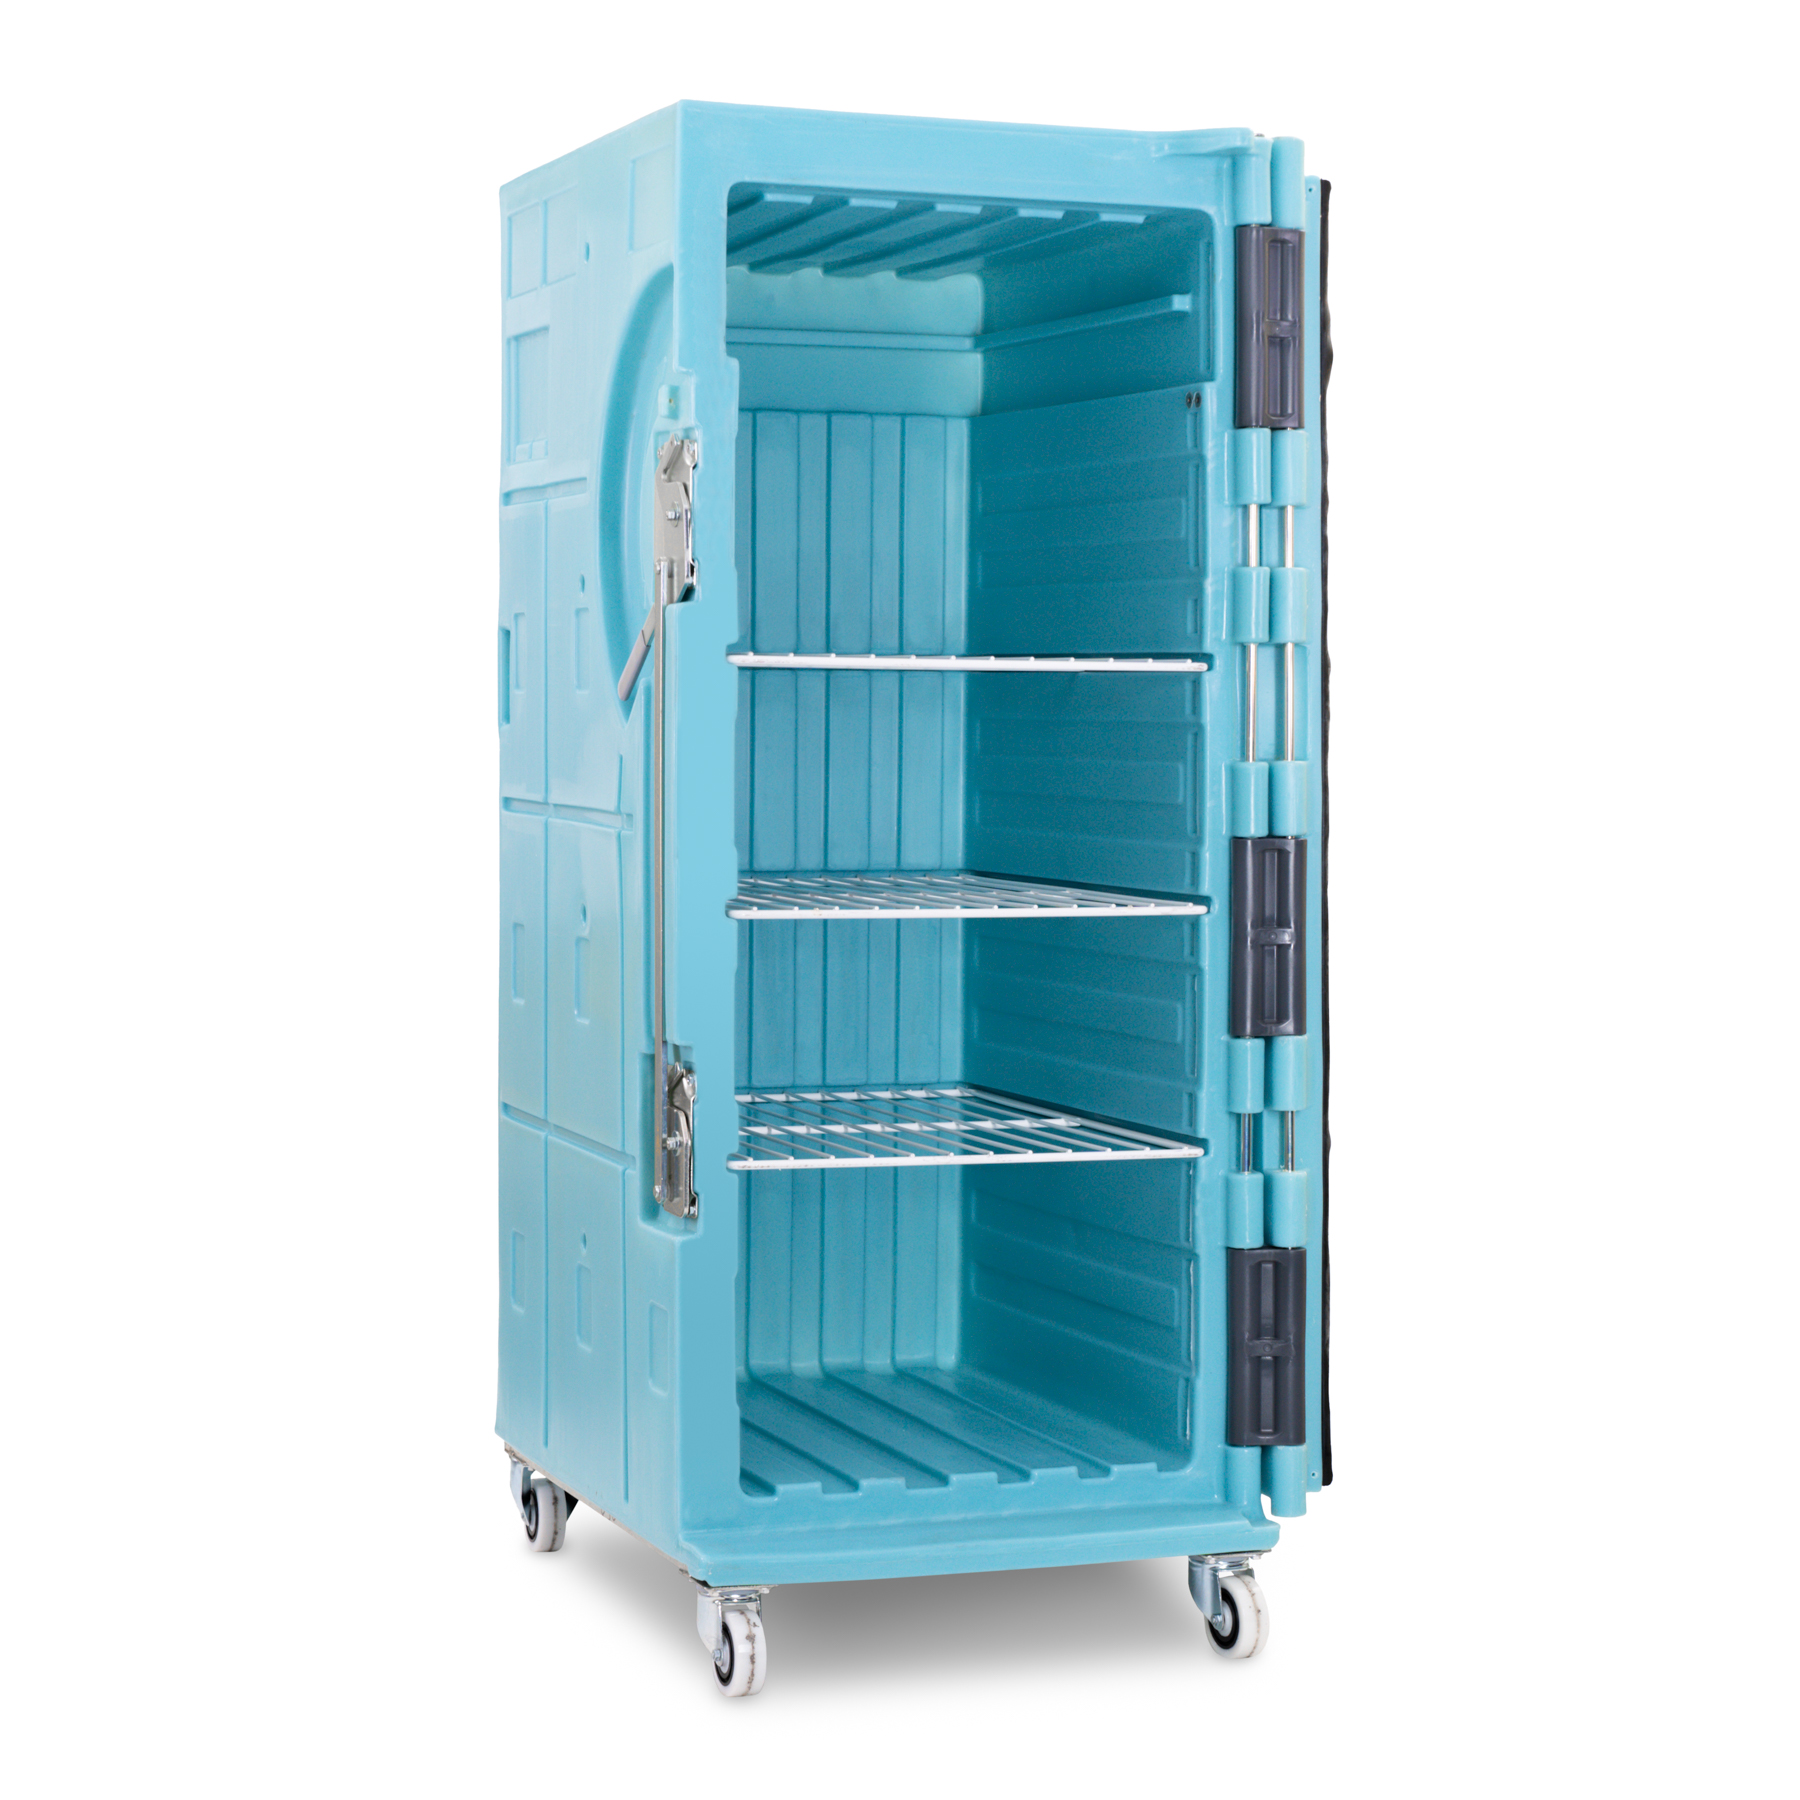 INSULATED ROLL 650 OLIVO MIDDLE SHELF